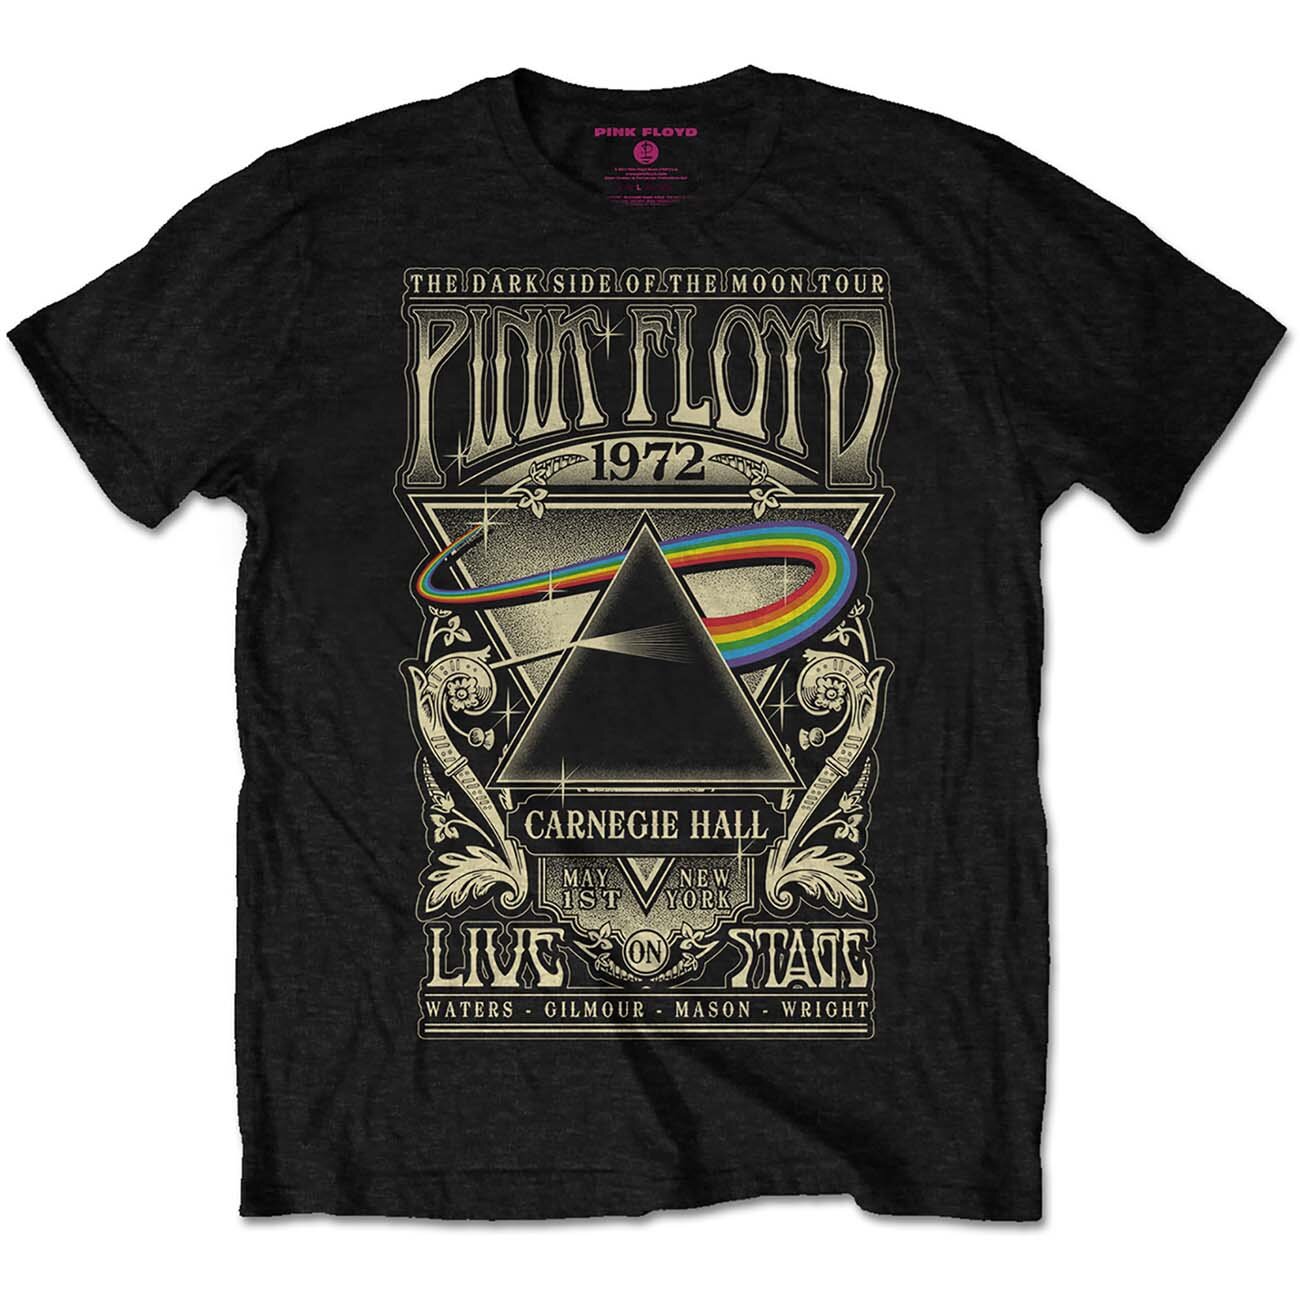 Rockoff T-Shirt Pink Floyd Carnegie Hall Poster Size M : photo 1